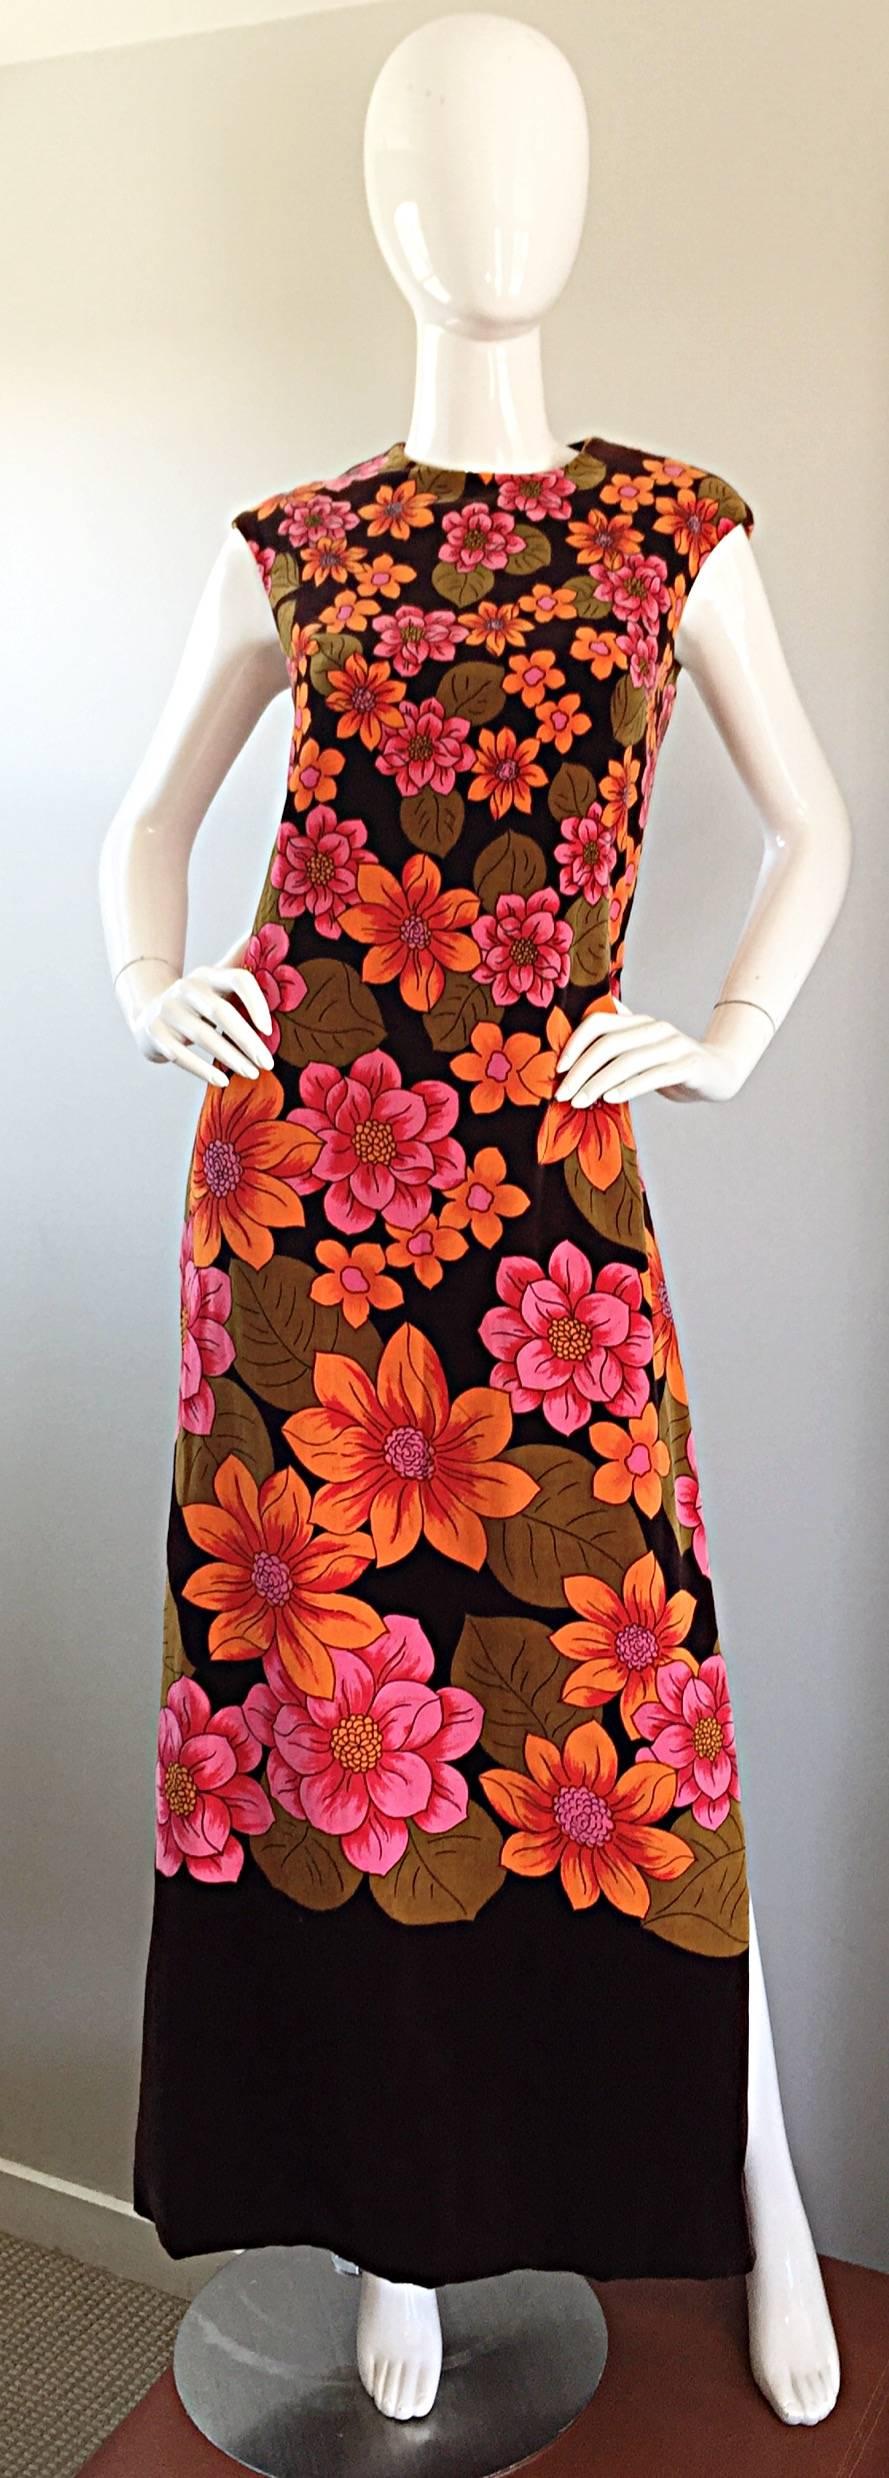 Amazing late 1960s DYNASTY soft velvet maxi dress! Vibrant colors of orange and pink, with a chocolate brown backdrop. Mod flower prints throughout. Extremely well made, with quite a bit of attention to detail in the construction. Luxurious soft